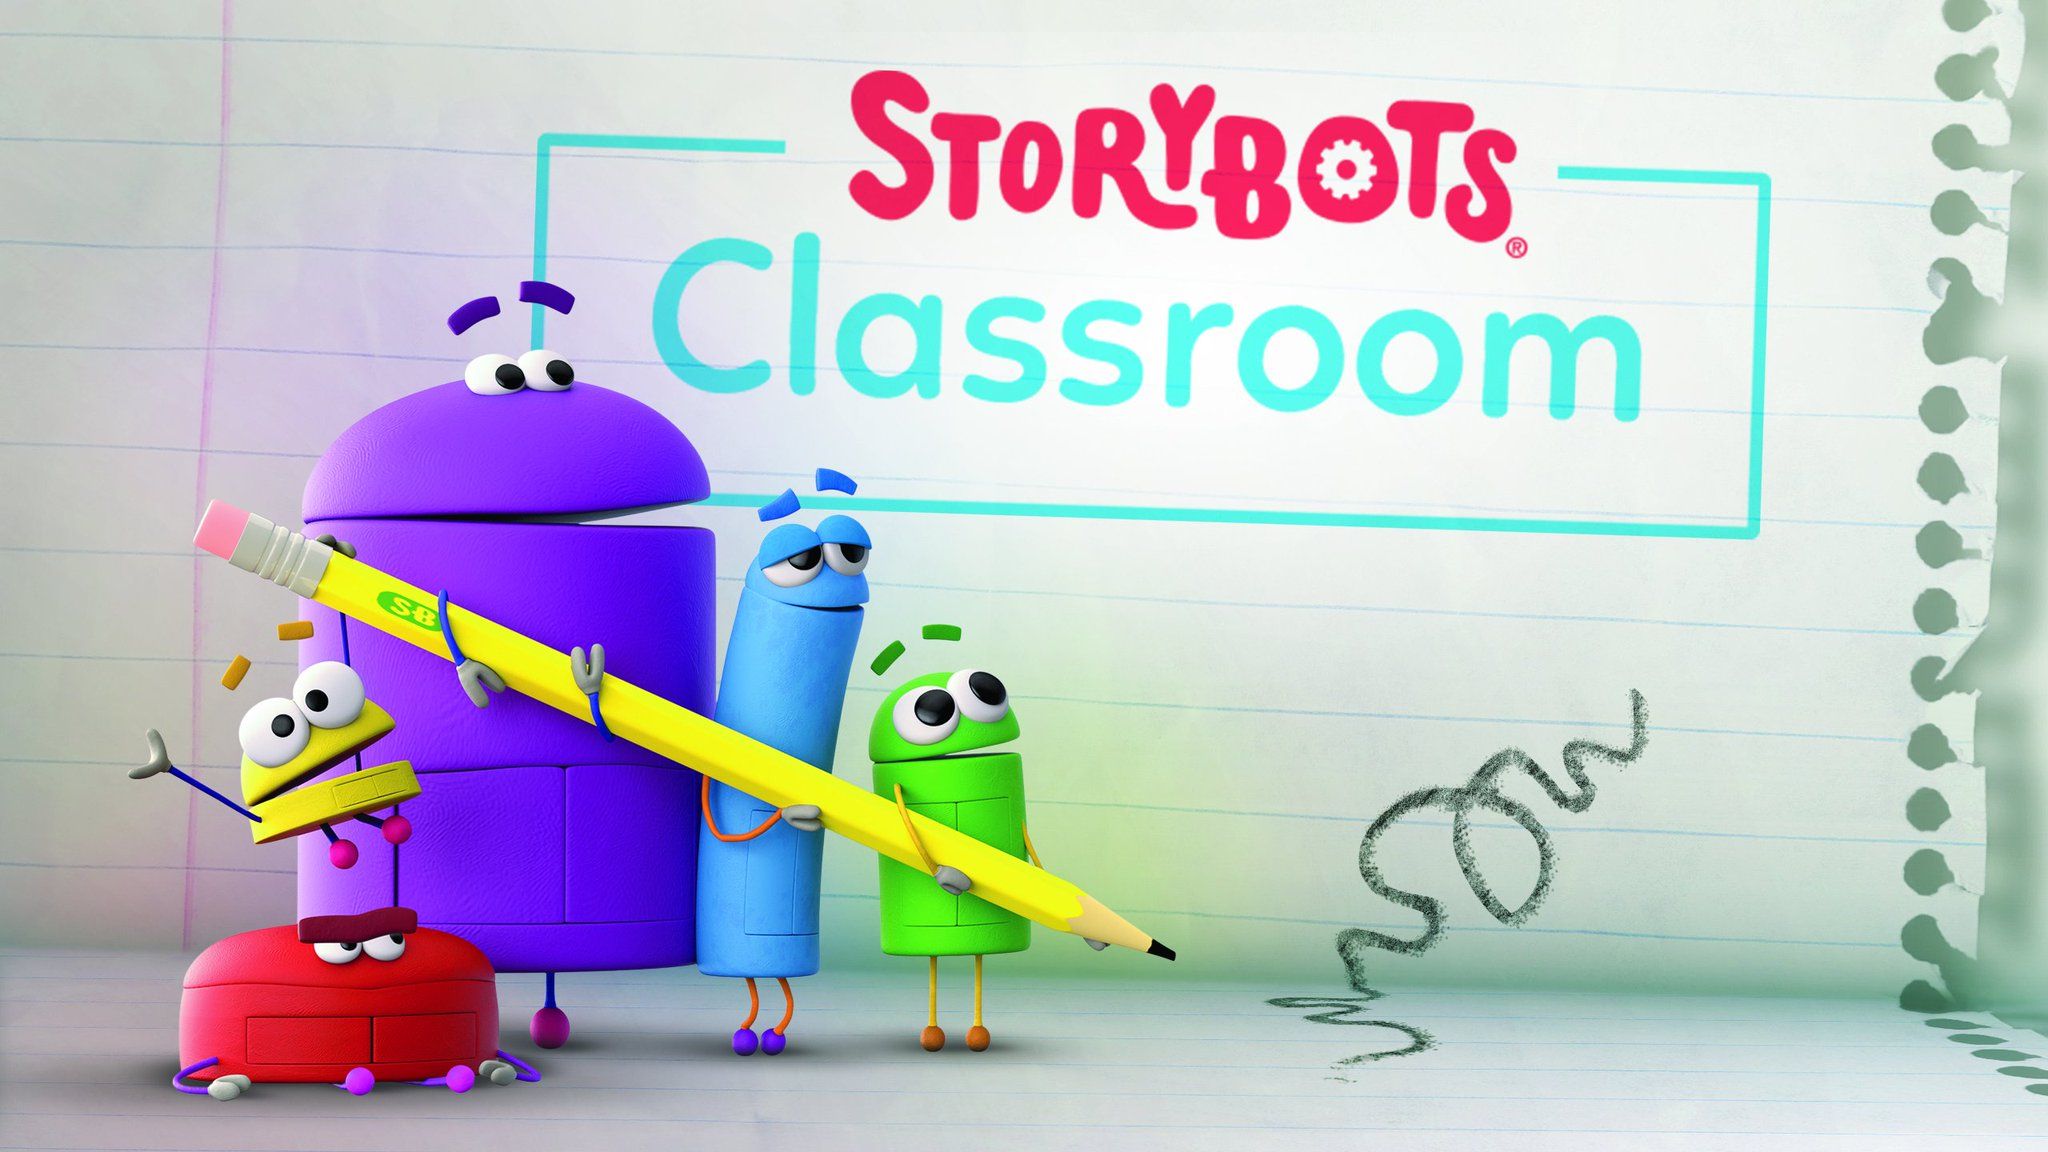 StoryBots Classroom is a 2017 Teachers' Choice Award winner! 100% FREE access for educators available here →